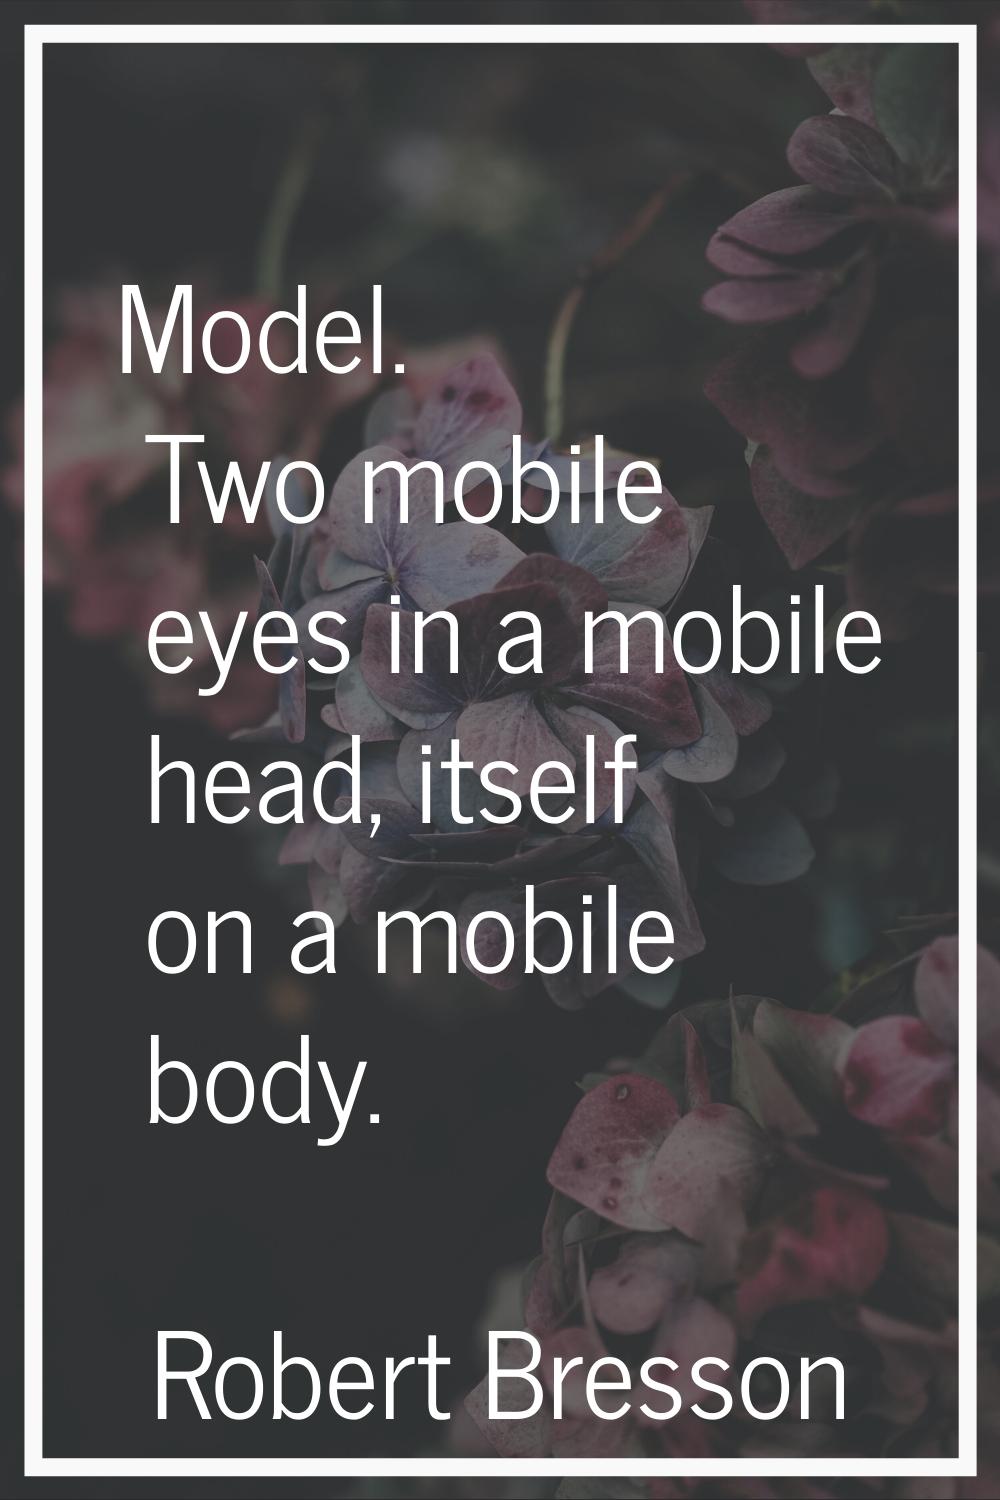 Model. Two mobile eyes in a mobile head, itself on a mobile body.